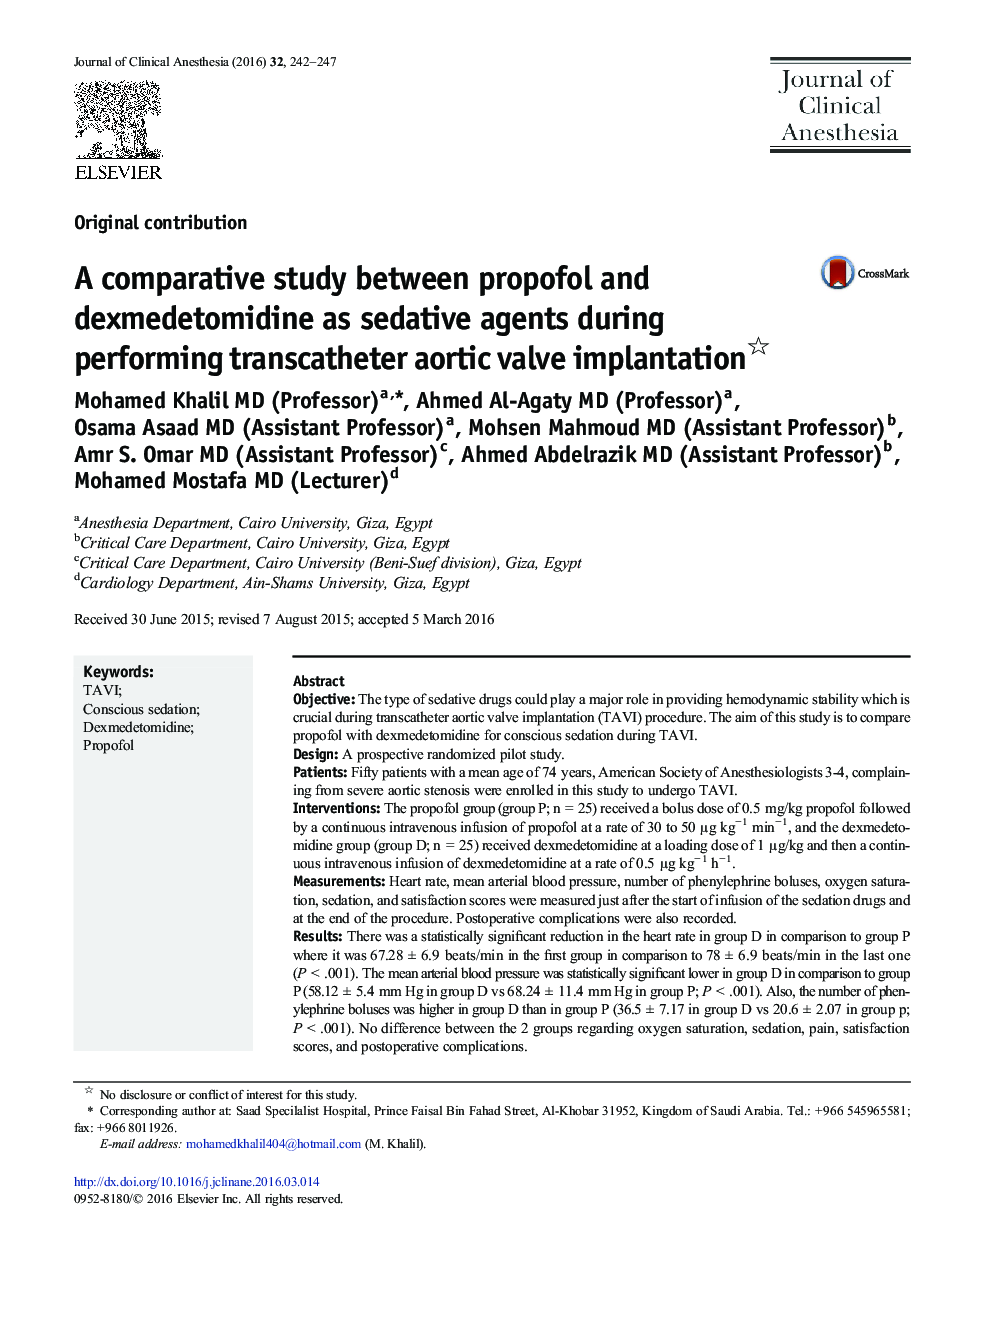 A comparative study between propofol and dexmedetomidine as sedative agents during performing transcatheter aortic valve implantation